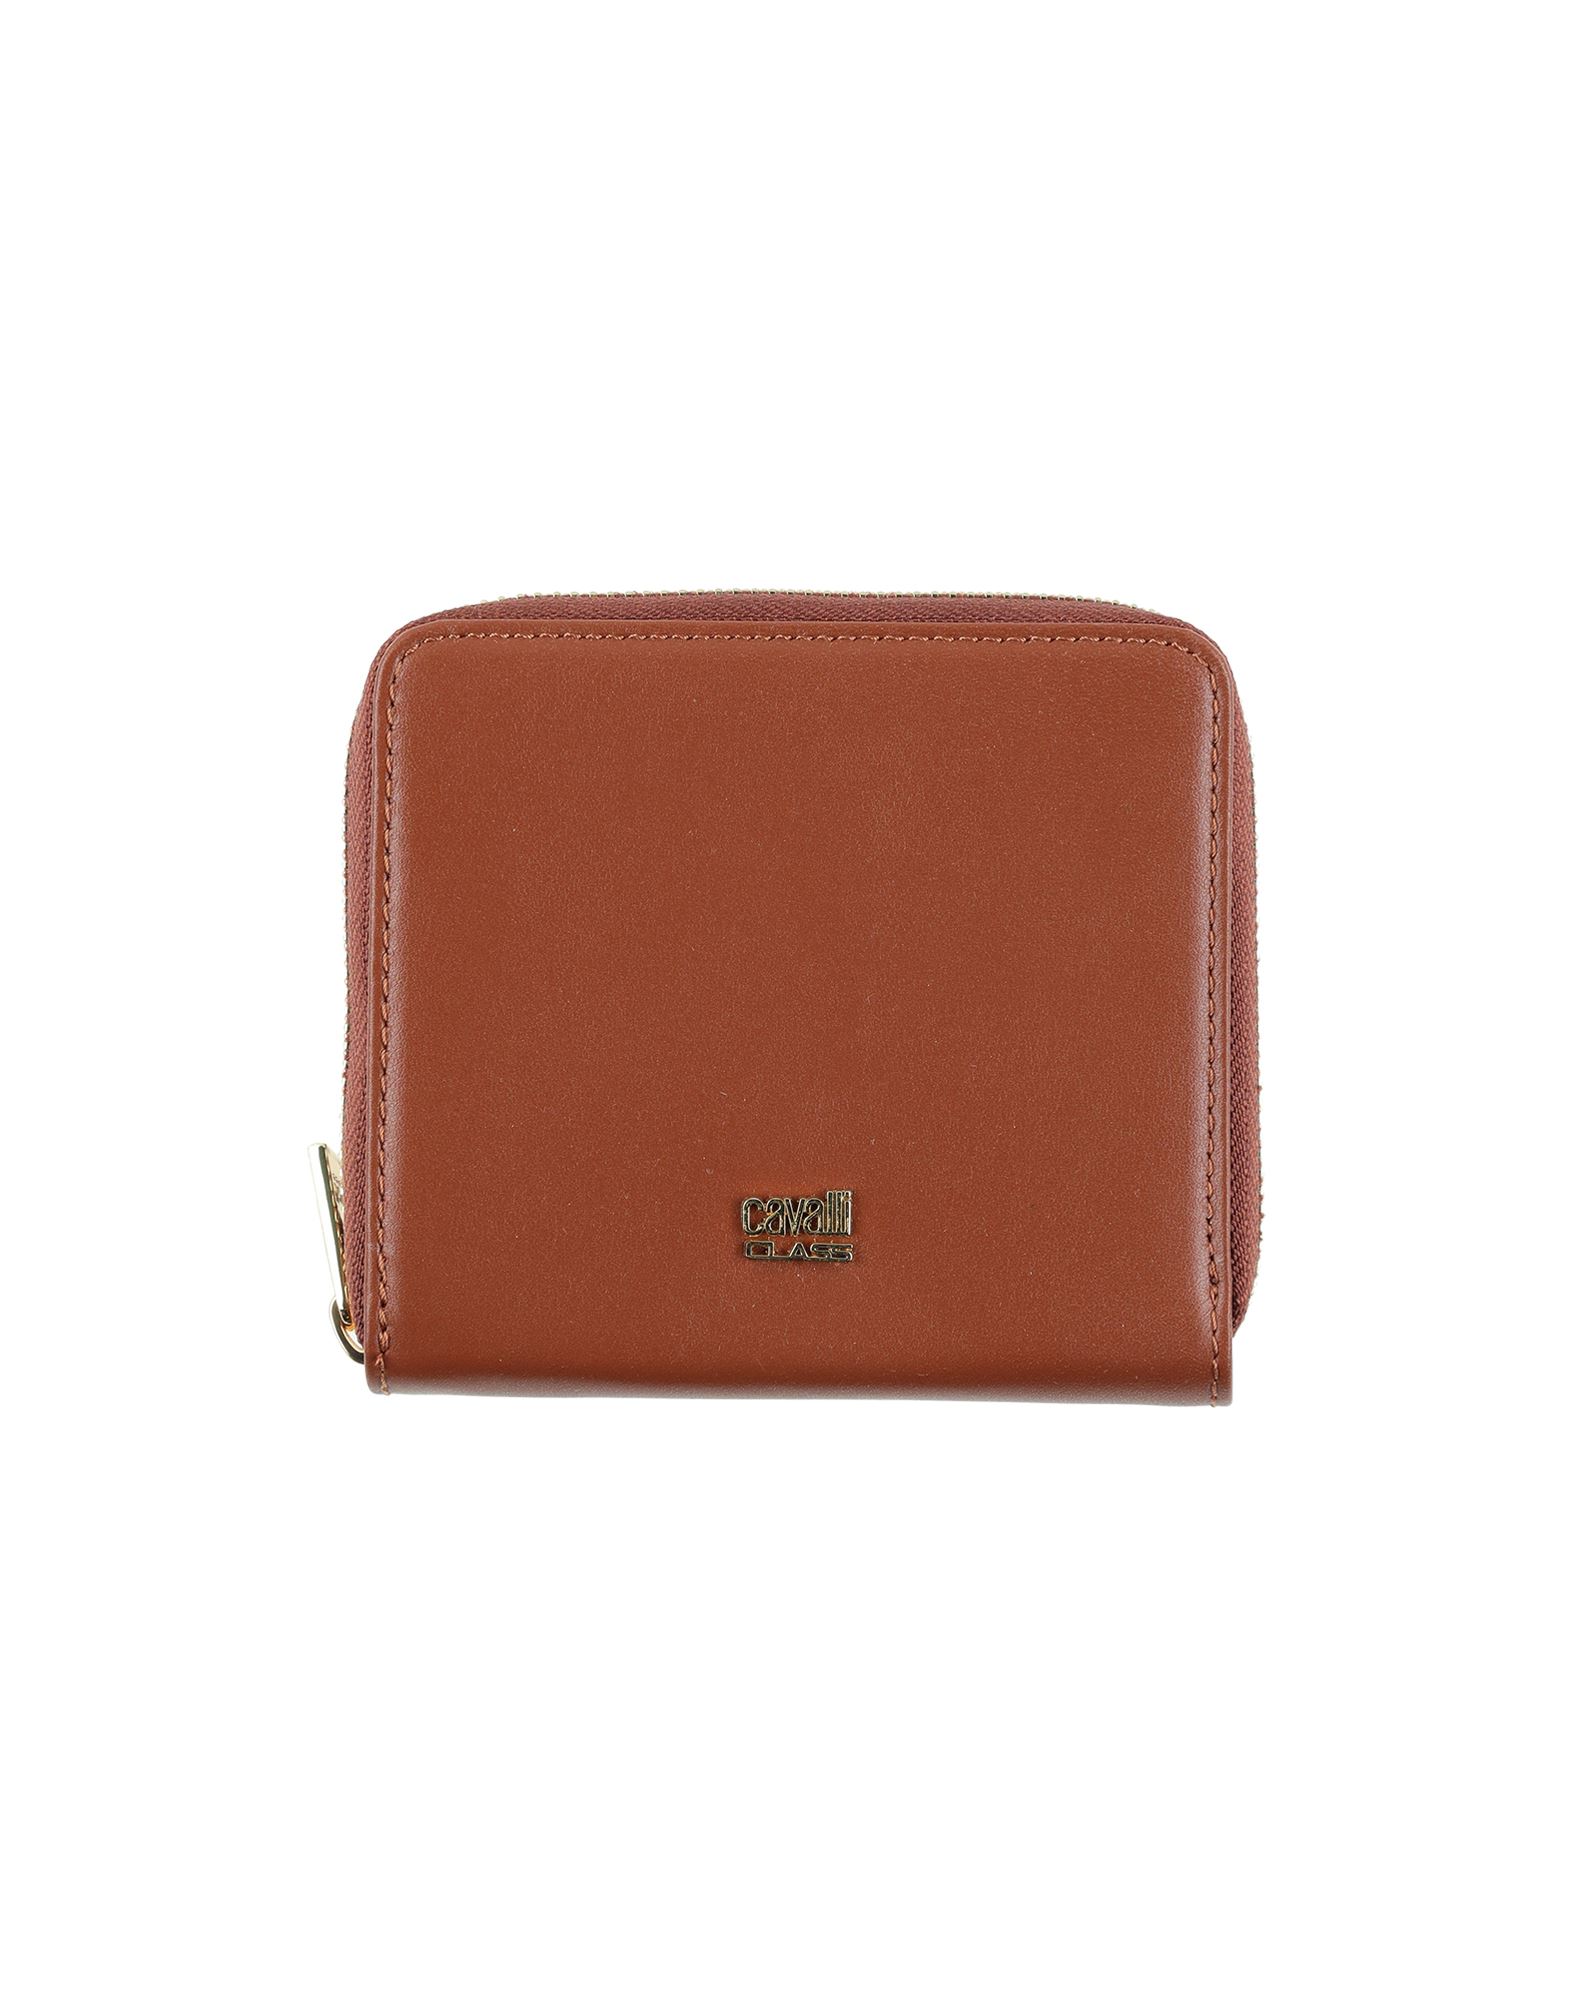 Cavalli Class Wallets In Brown